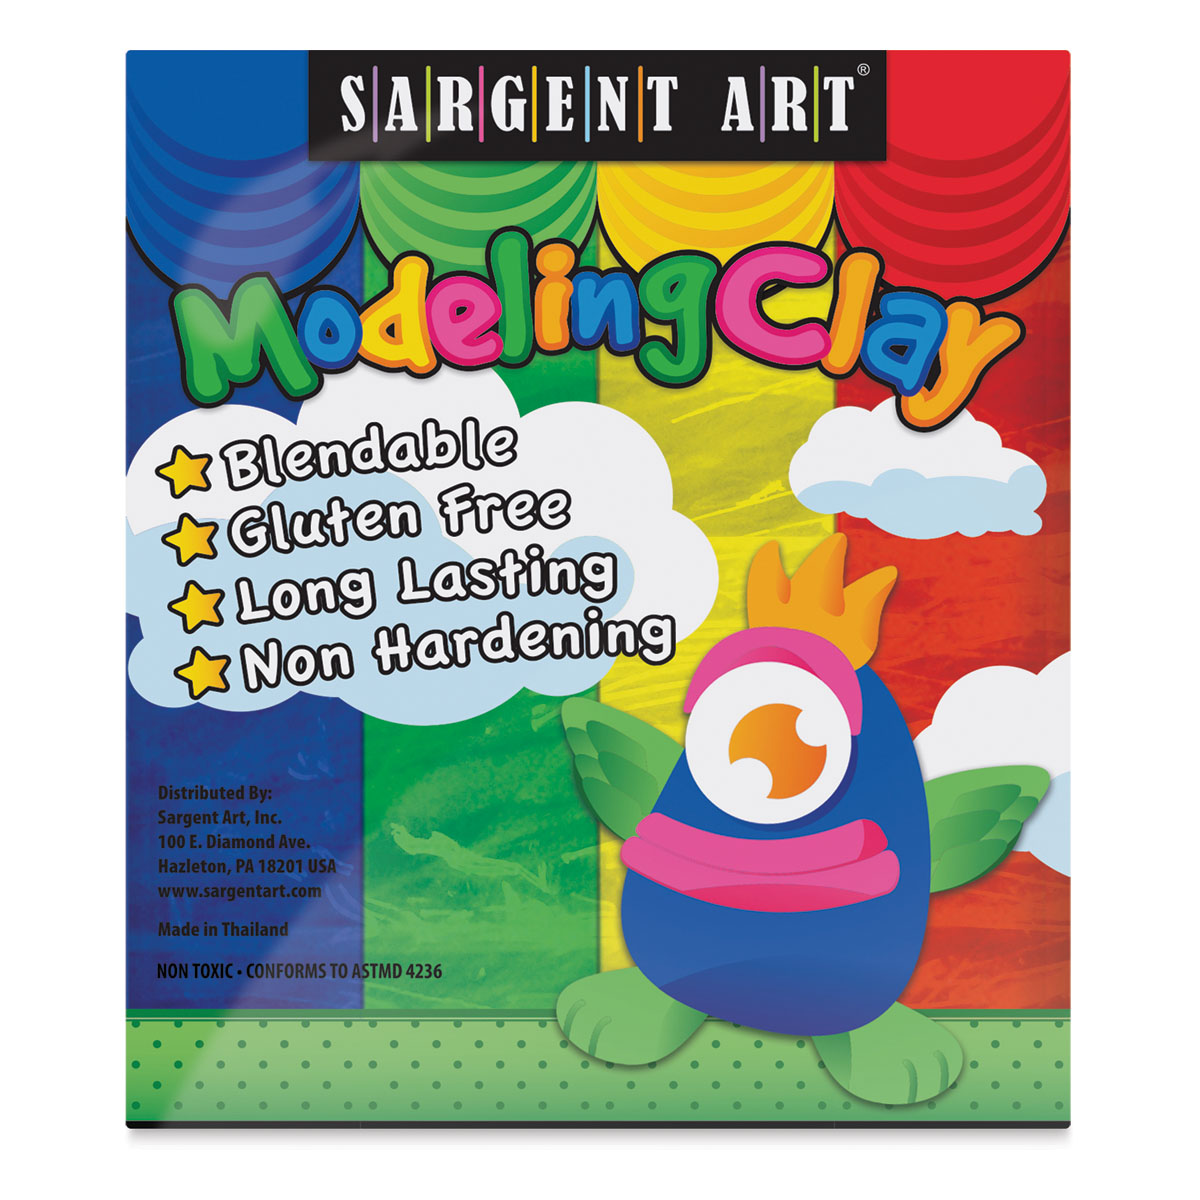 sargent art modeling clay